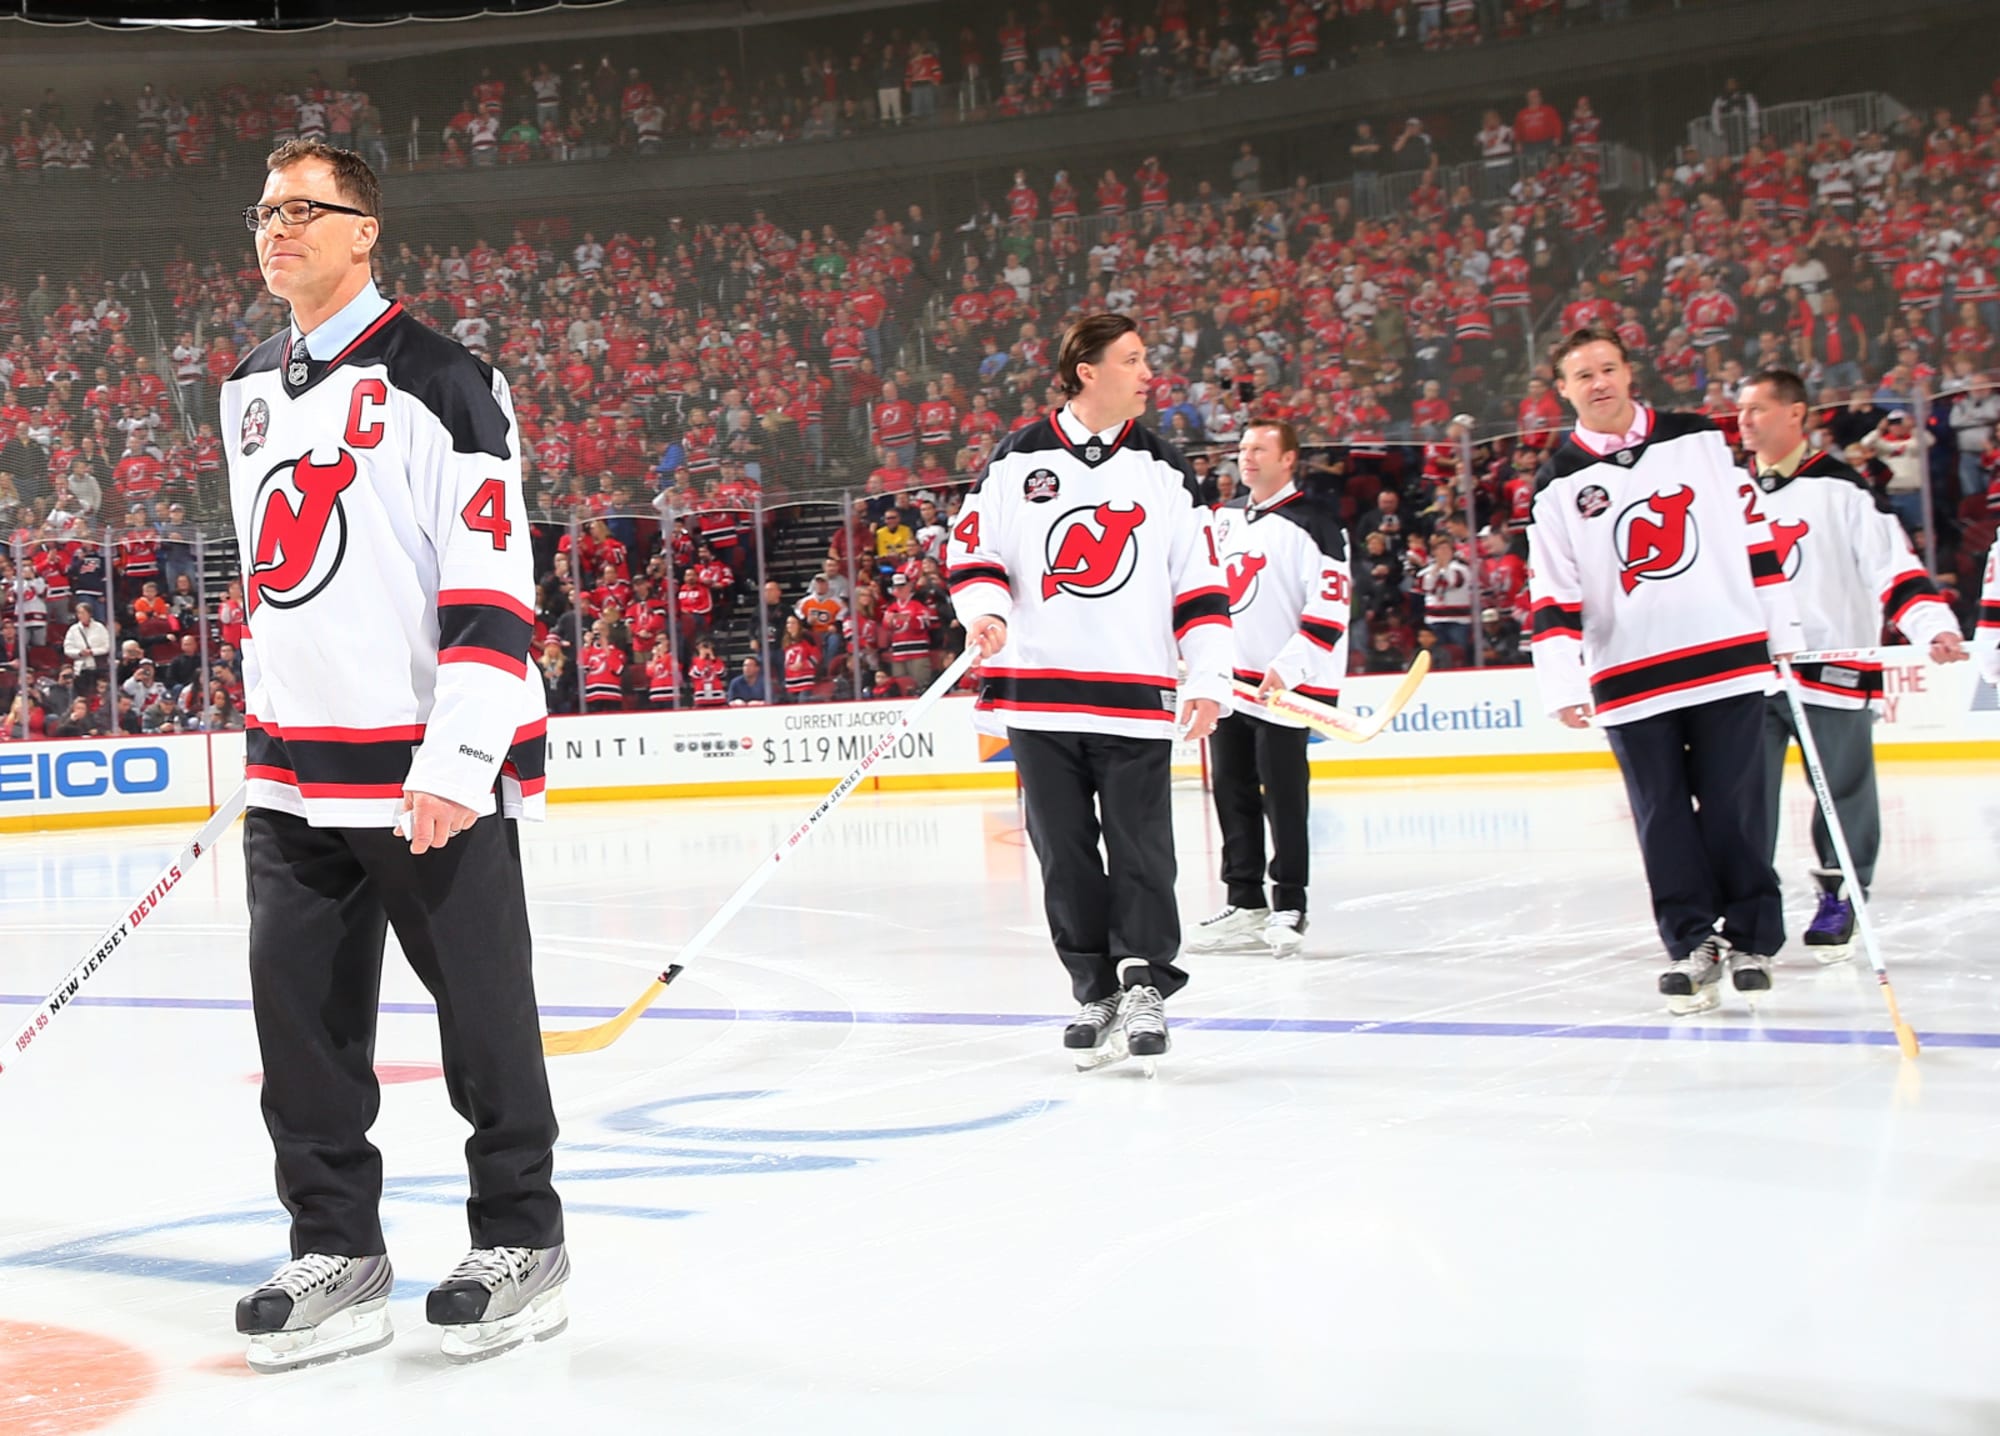 NJ Devils to celebrate 20th anniversary of 1995 Stanley Cup Championship